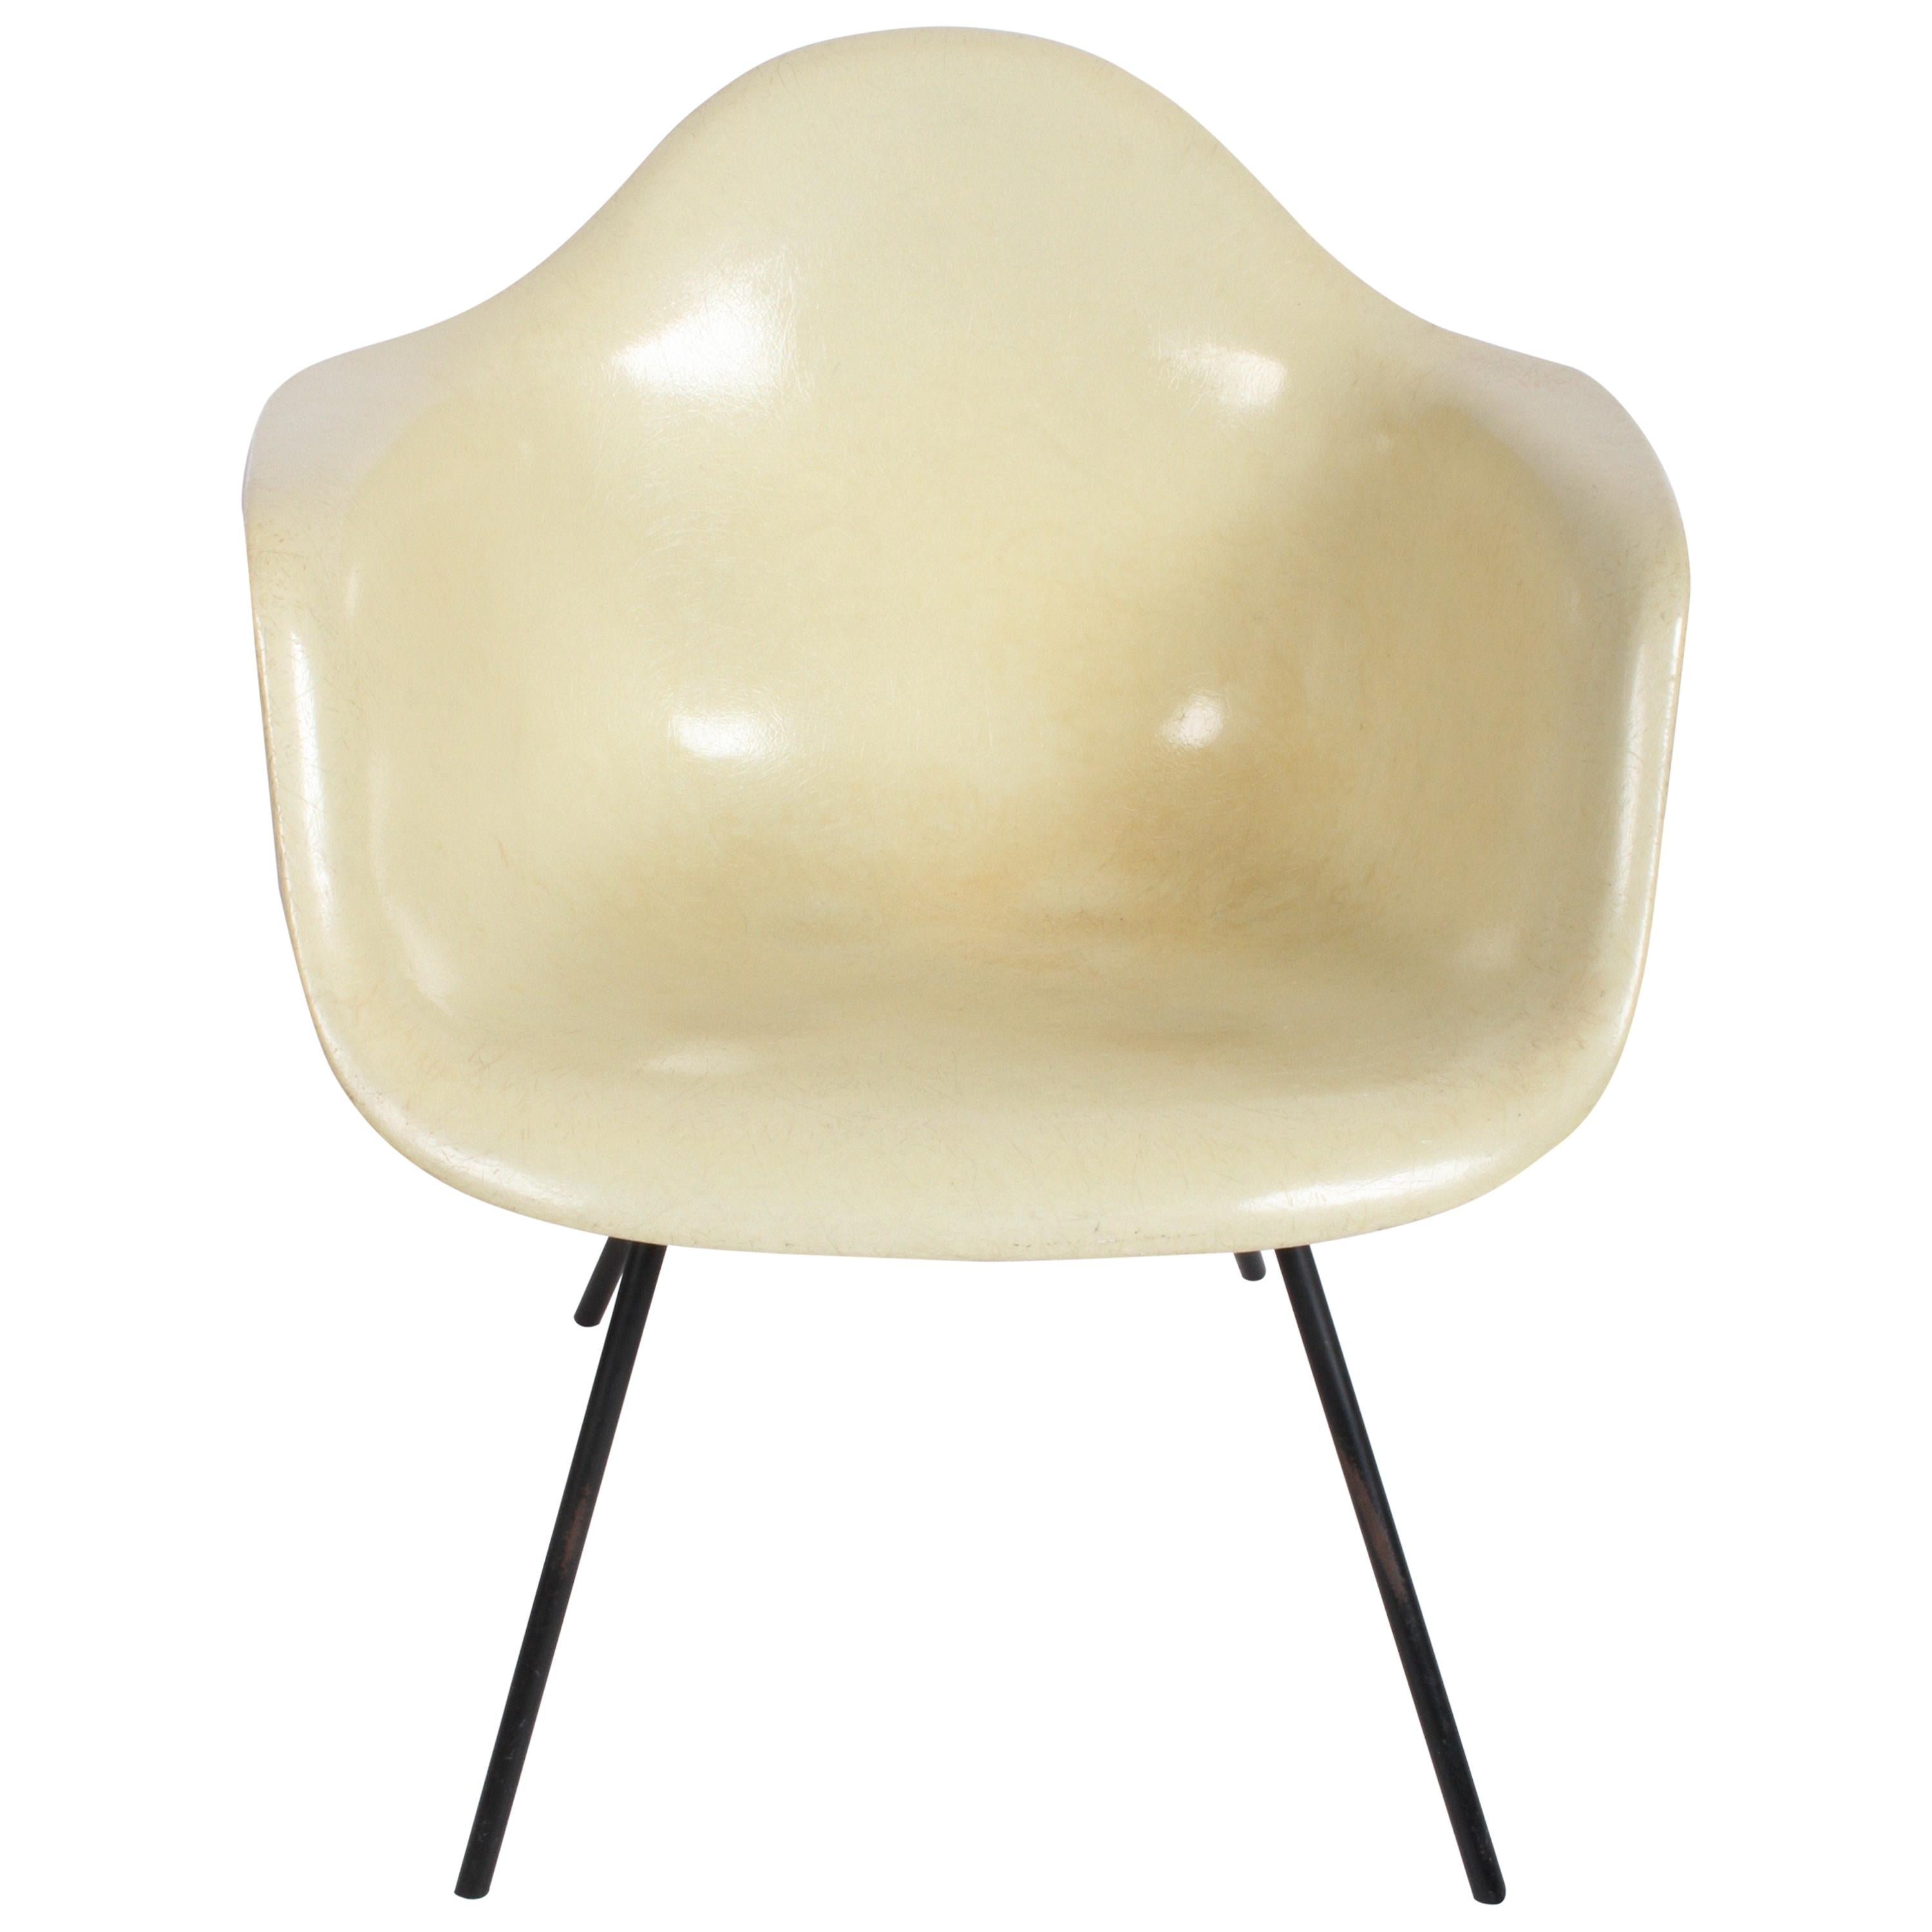 Charles Eames for Herman Miller Low DAX Shell Armchair